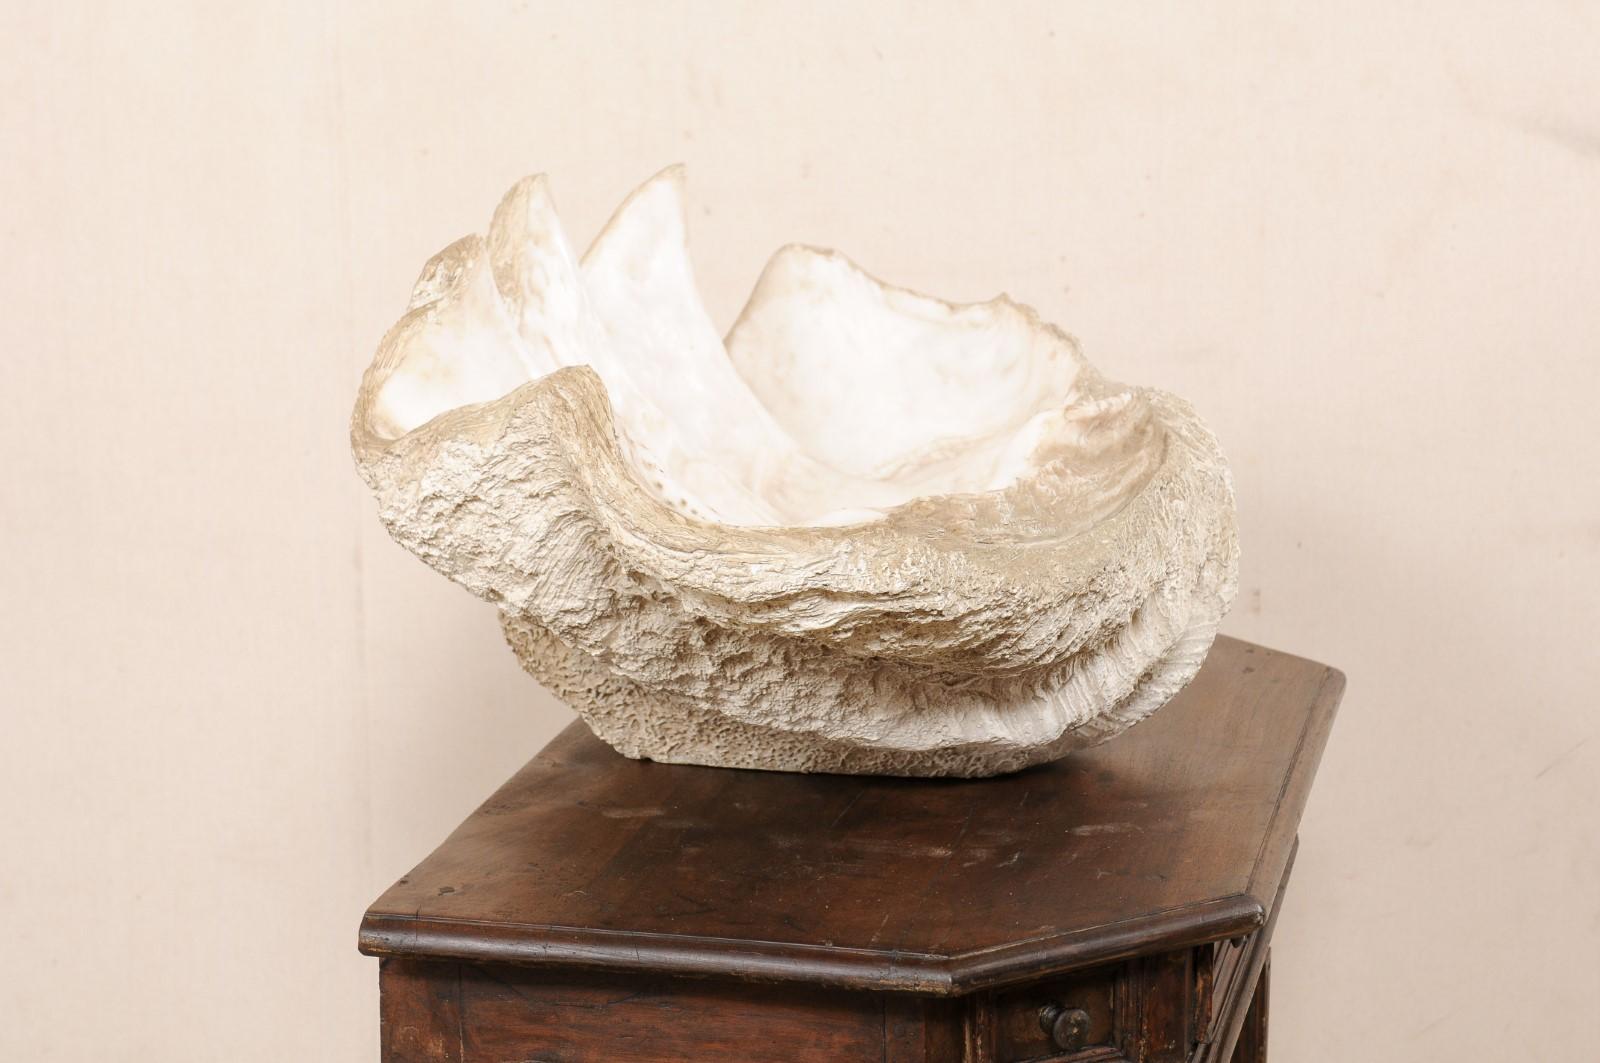 20th Century Giant Clam Shell 'Faux' Fabulously Artisan Crafted-Looks like the Real Thing For Sale